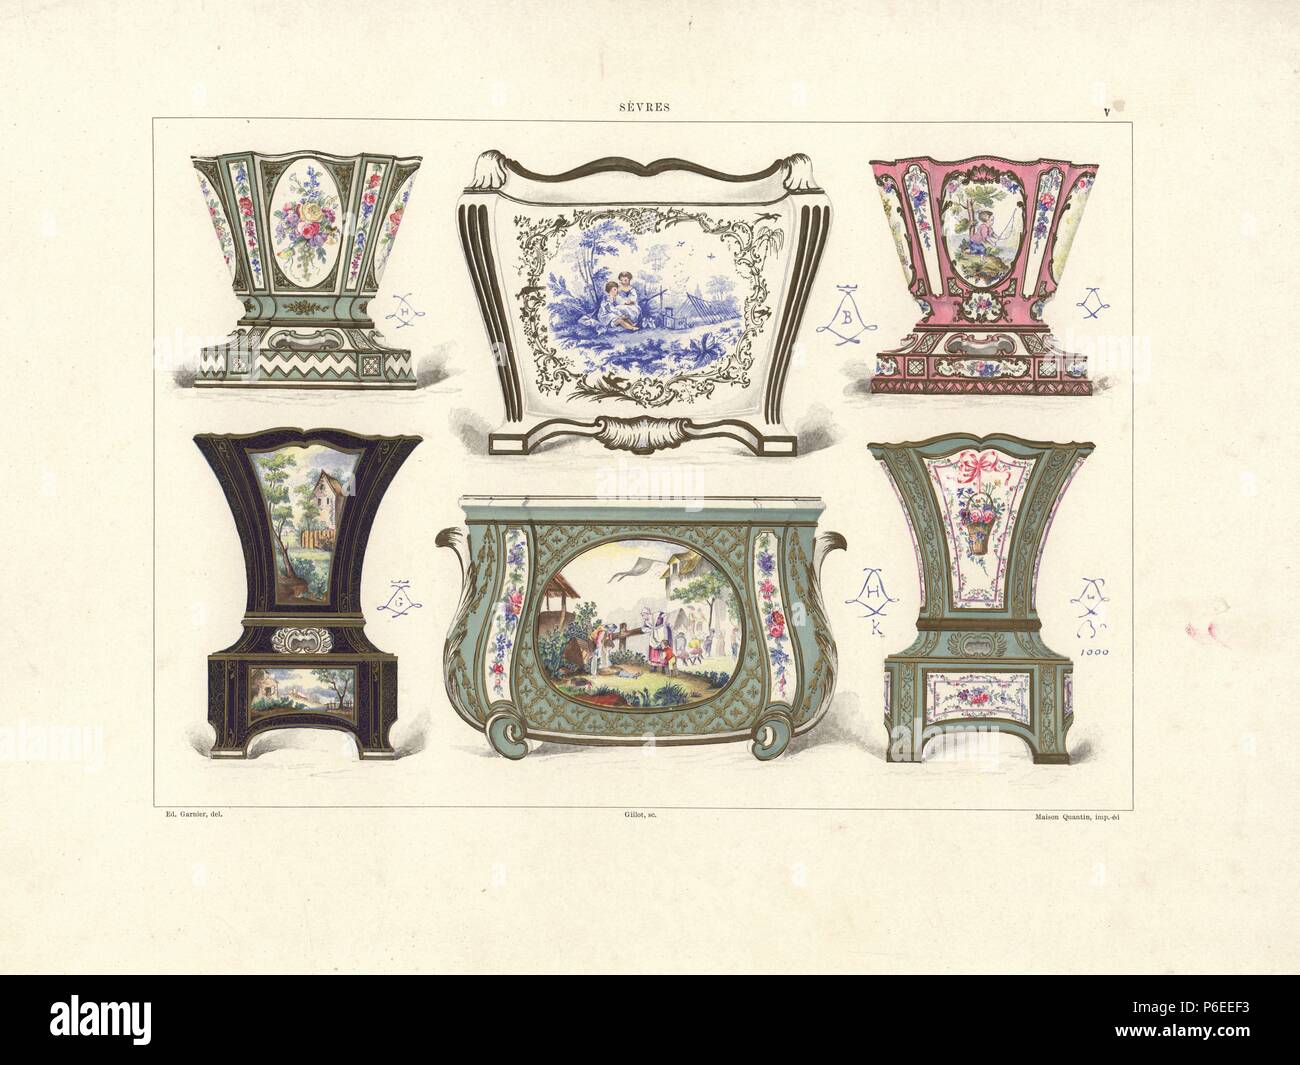 Flower pots or jardinieres: owned by Edouard Andre 1760, decorated by Vieillard 1754, owned by Baron Alphonse de Rothschild 1752, decorated by Vieillard 1759, painted by Charles-Nicolas Dodin 1760, painted by Bulidon 1764. Chromolithograph by Gillot of an illustration by Edouard Garnier from The Soft Paste Porcelain of Sevres, Maison Quantin, Paris, 1891. Stock Photo